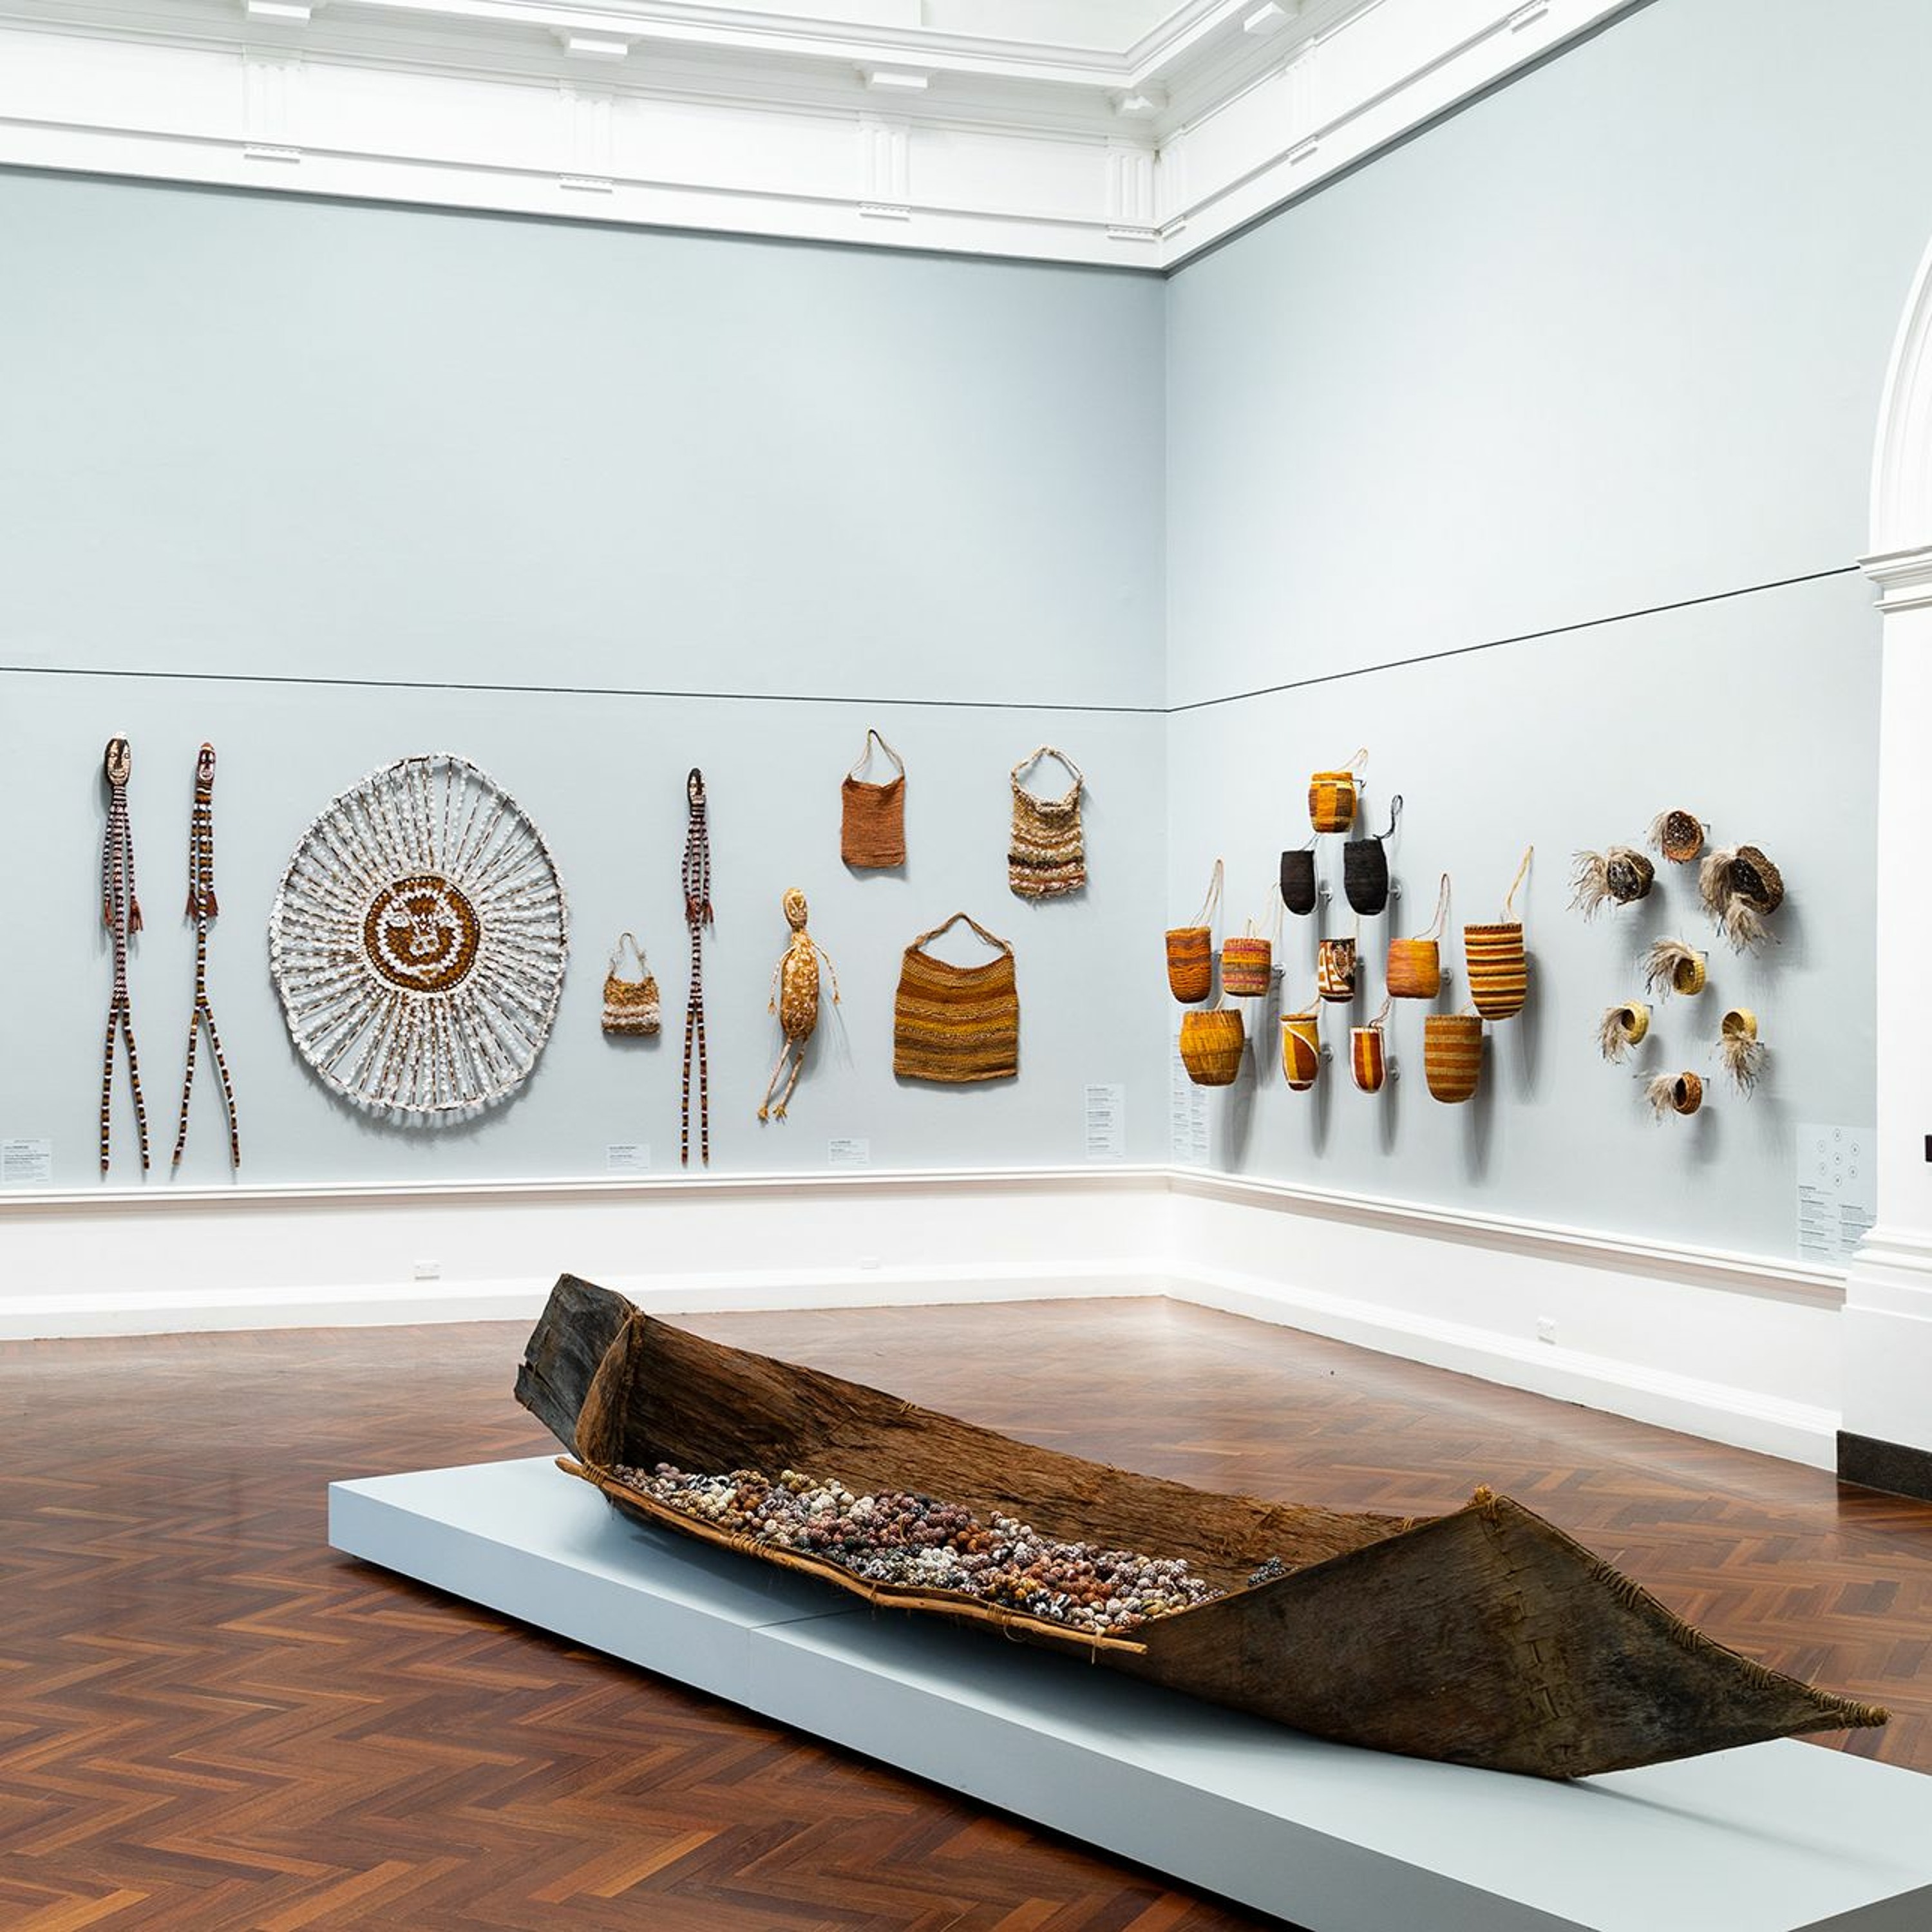 Tuesday Talk - Join Fiona Salmon to discuss 'Keepers of Culture' as part of Tarnanthi